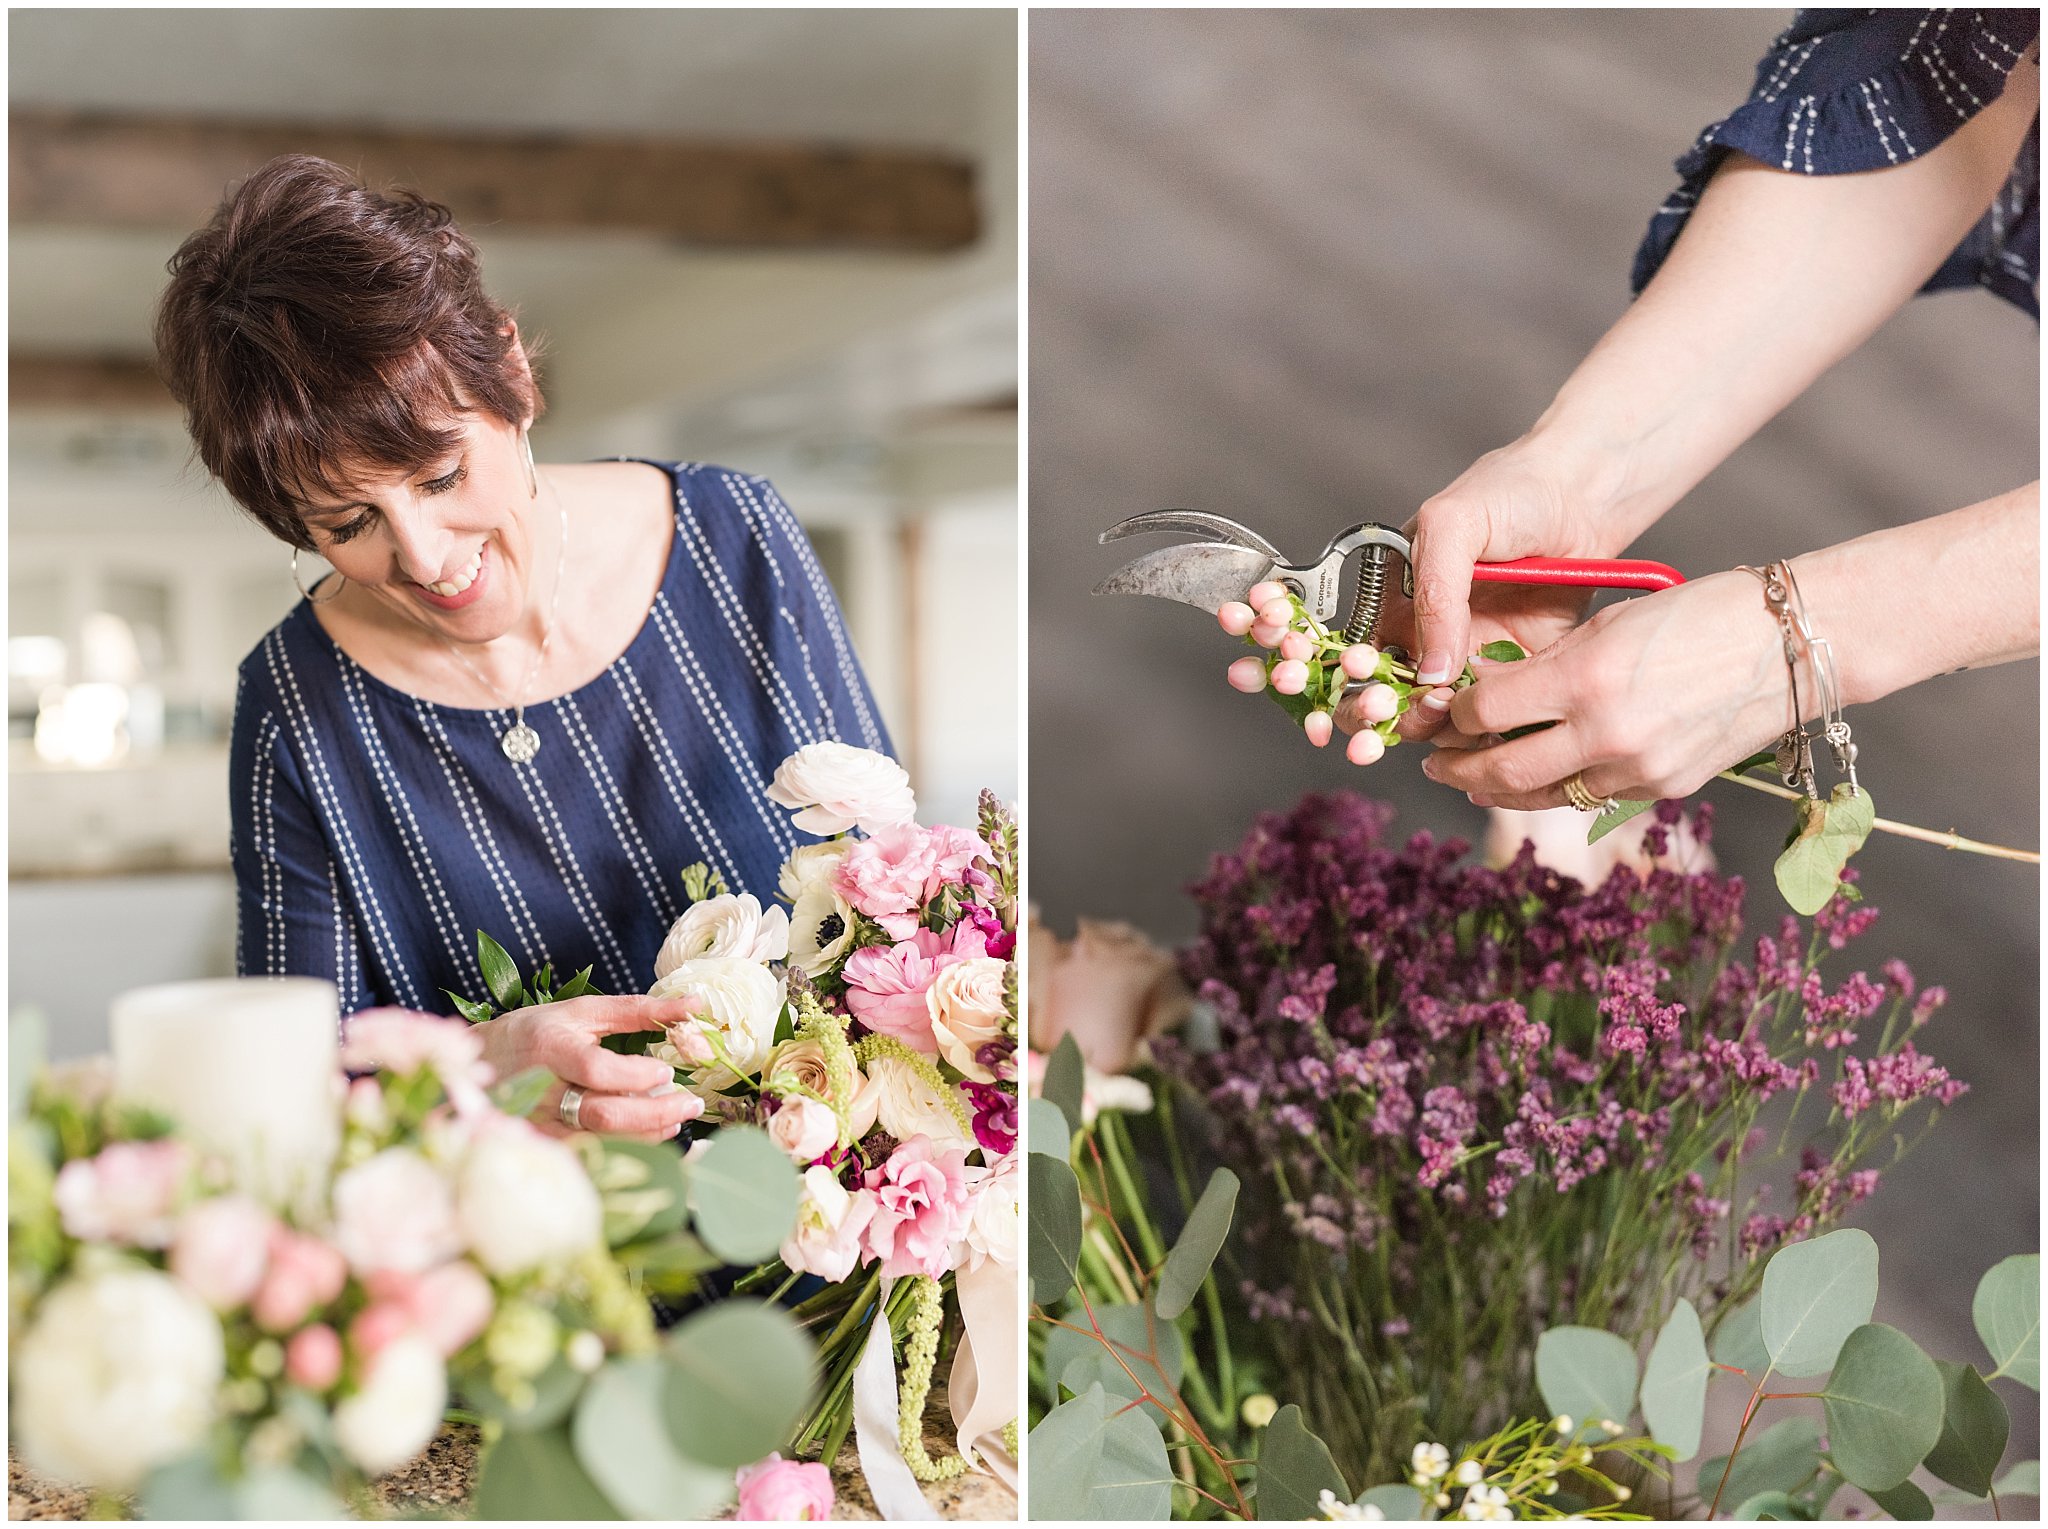 Florist adjusting and cutting flowers | Dancing Daisies Floral | Jessie and Dallin Photography